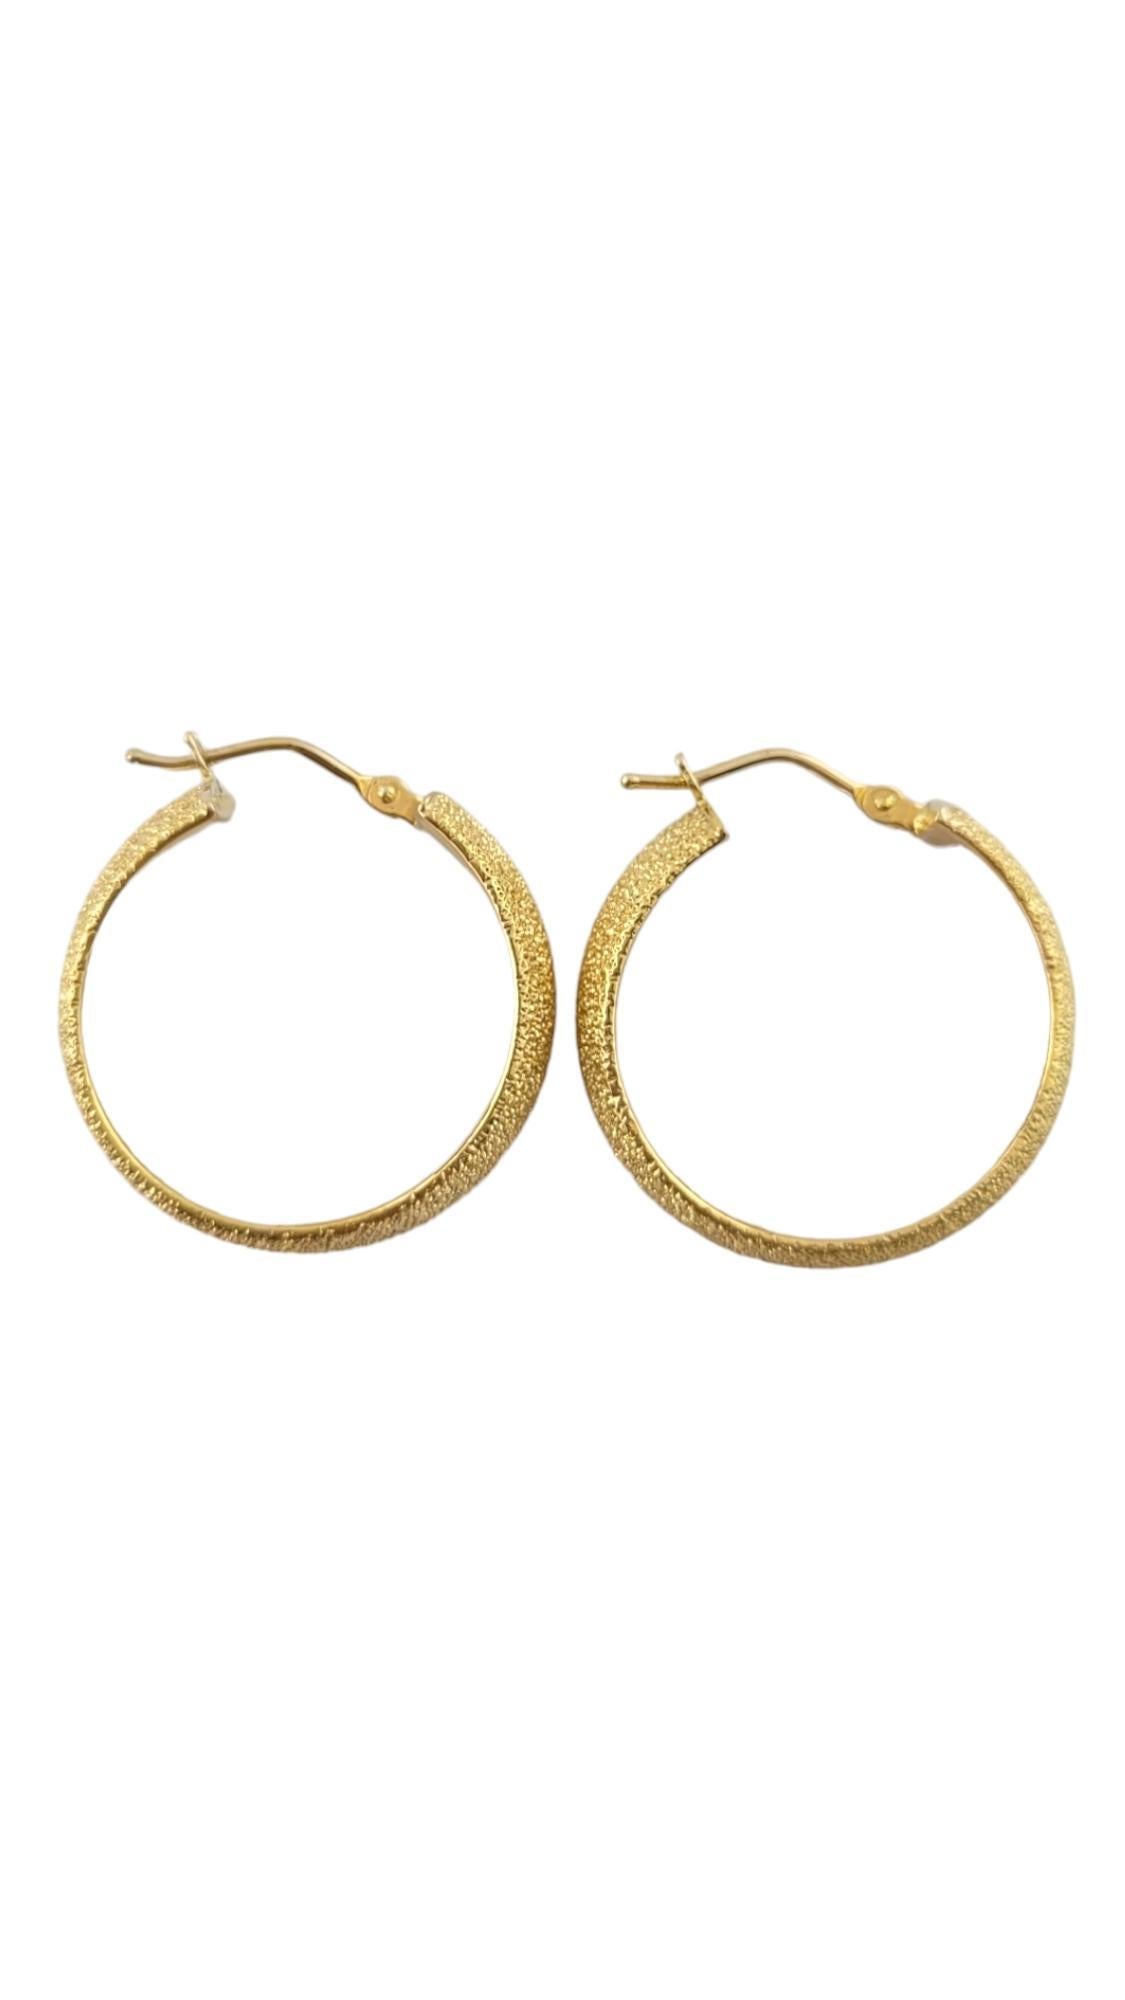 14K Yellow Gold Textured Sparkly Hoop Earrings

This beautiful set of 14K gold textured hoops will look gorgeous on anybody!

Diameter: 23.71mm
Width: 7.8mm'

Weight: 2.16 dwt/ 3.36 g

Hallmark: 14KT ITALY

Very good condition, professionally